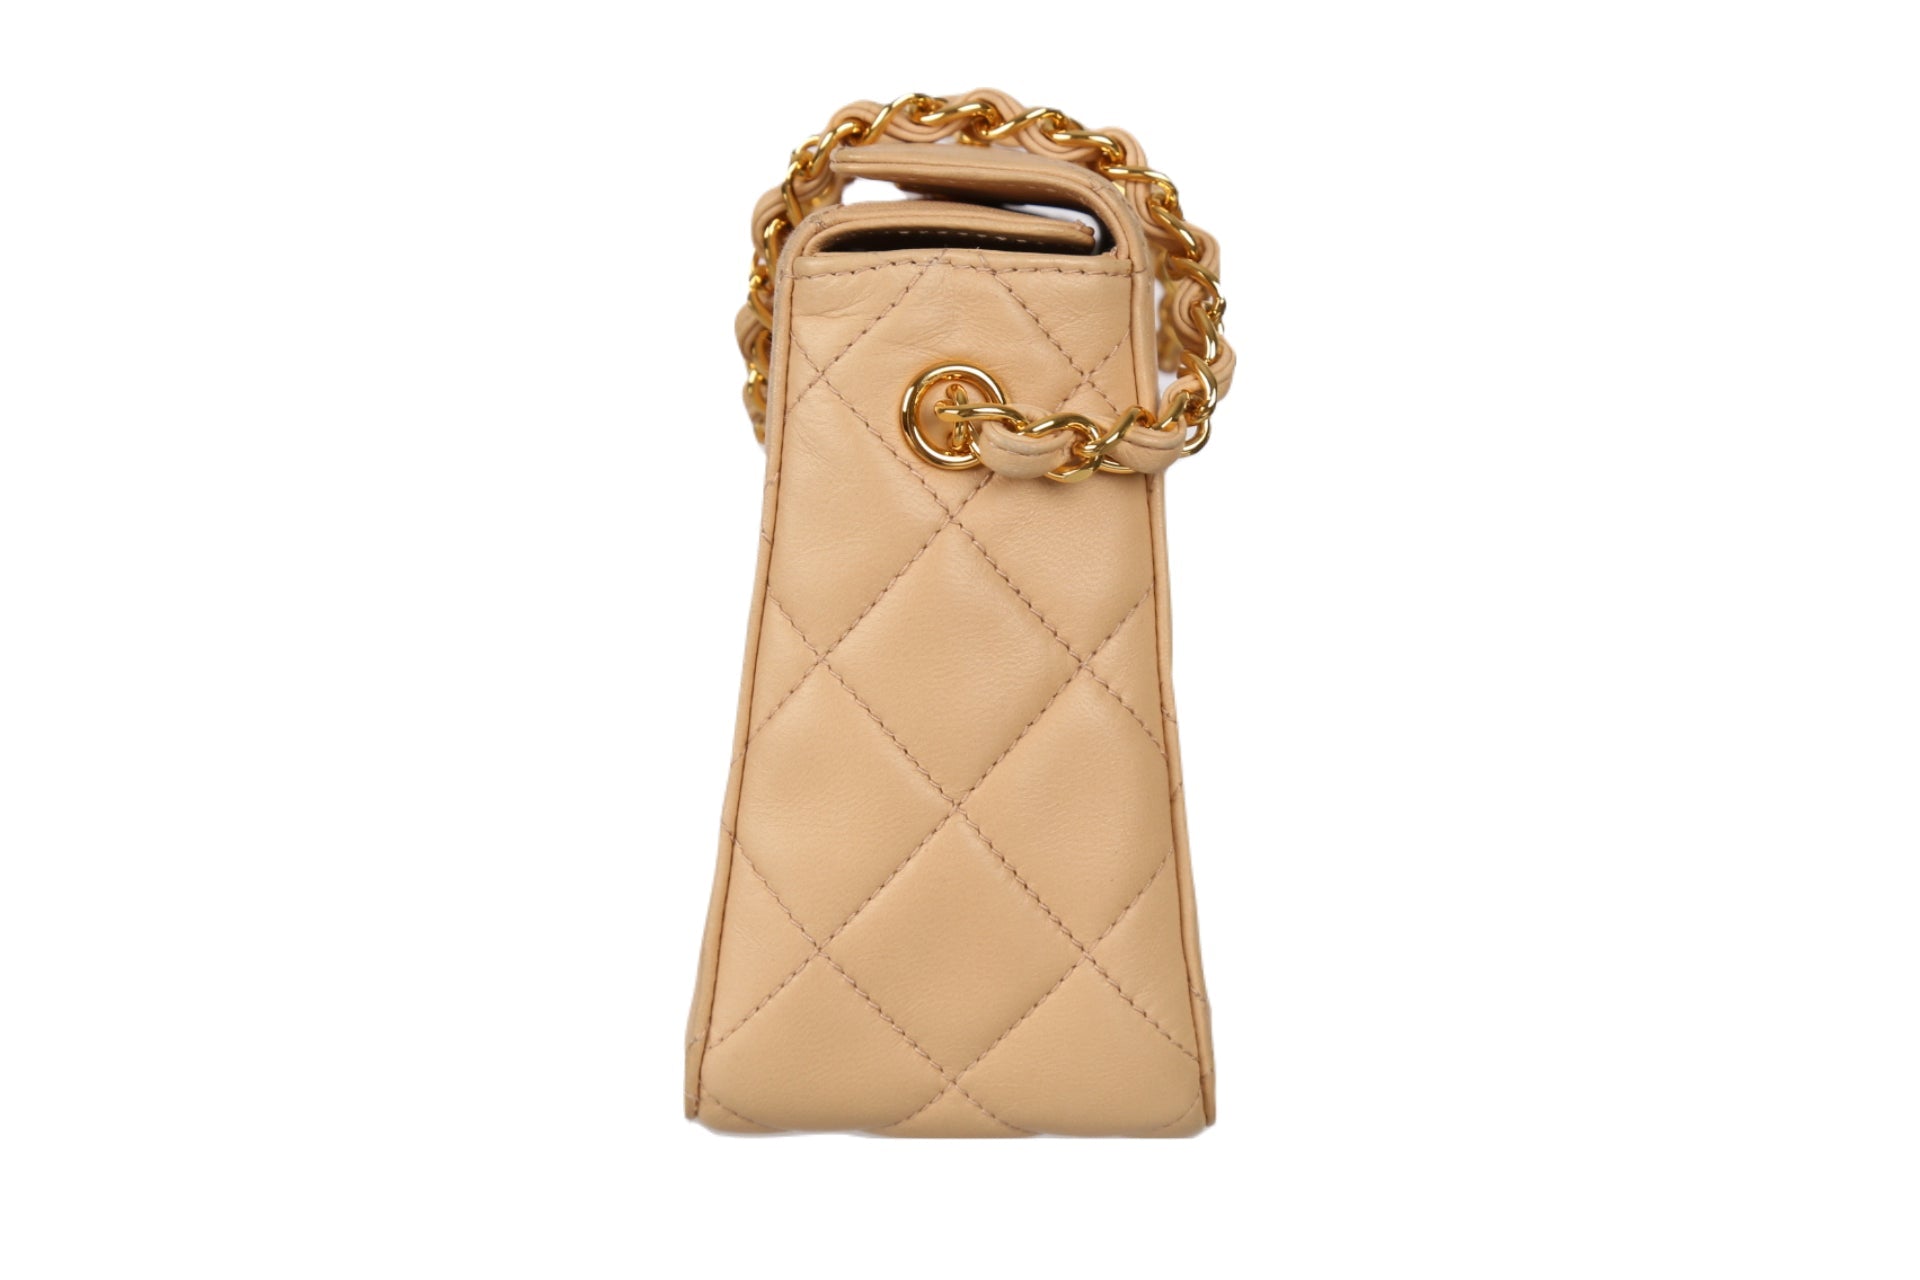 Chanel Beige Quilted Chain Mini Bag - Handbags